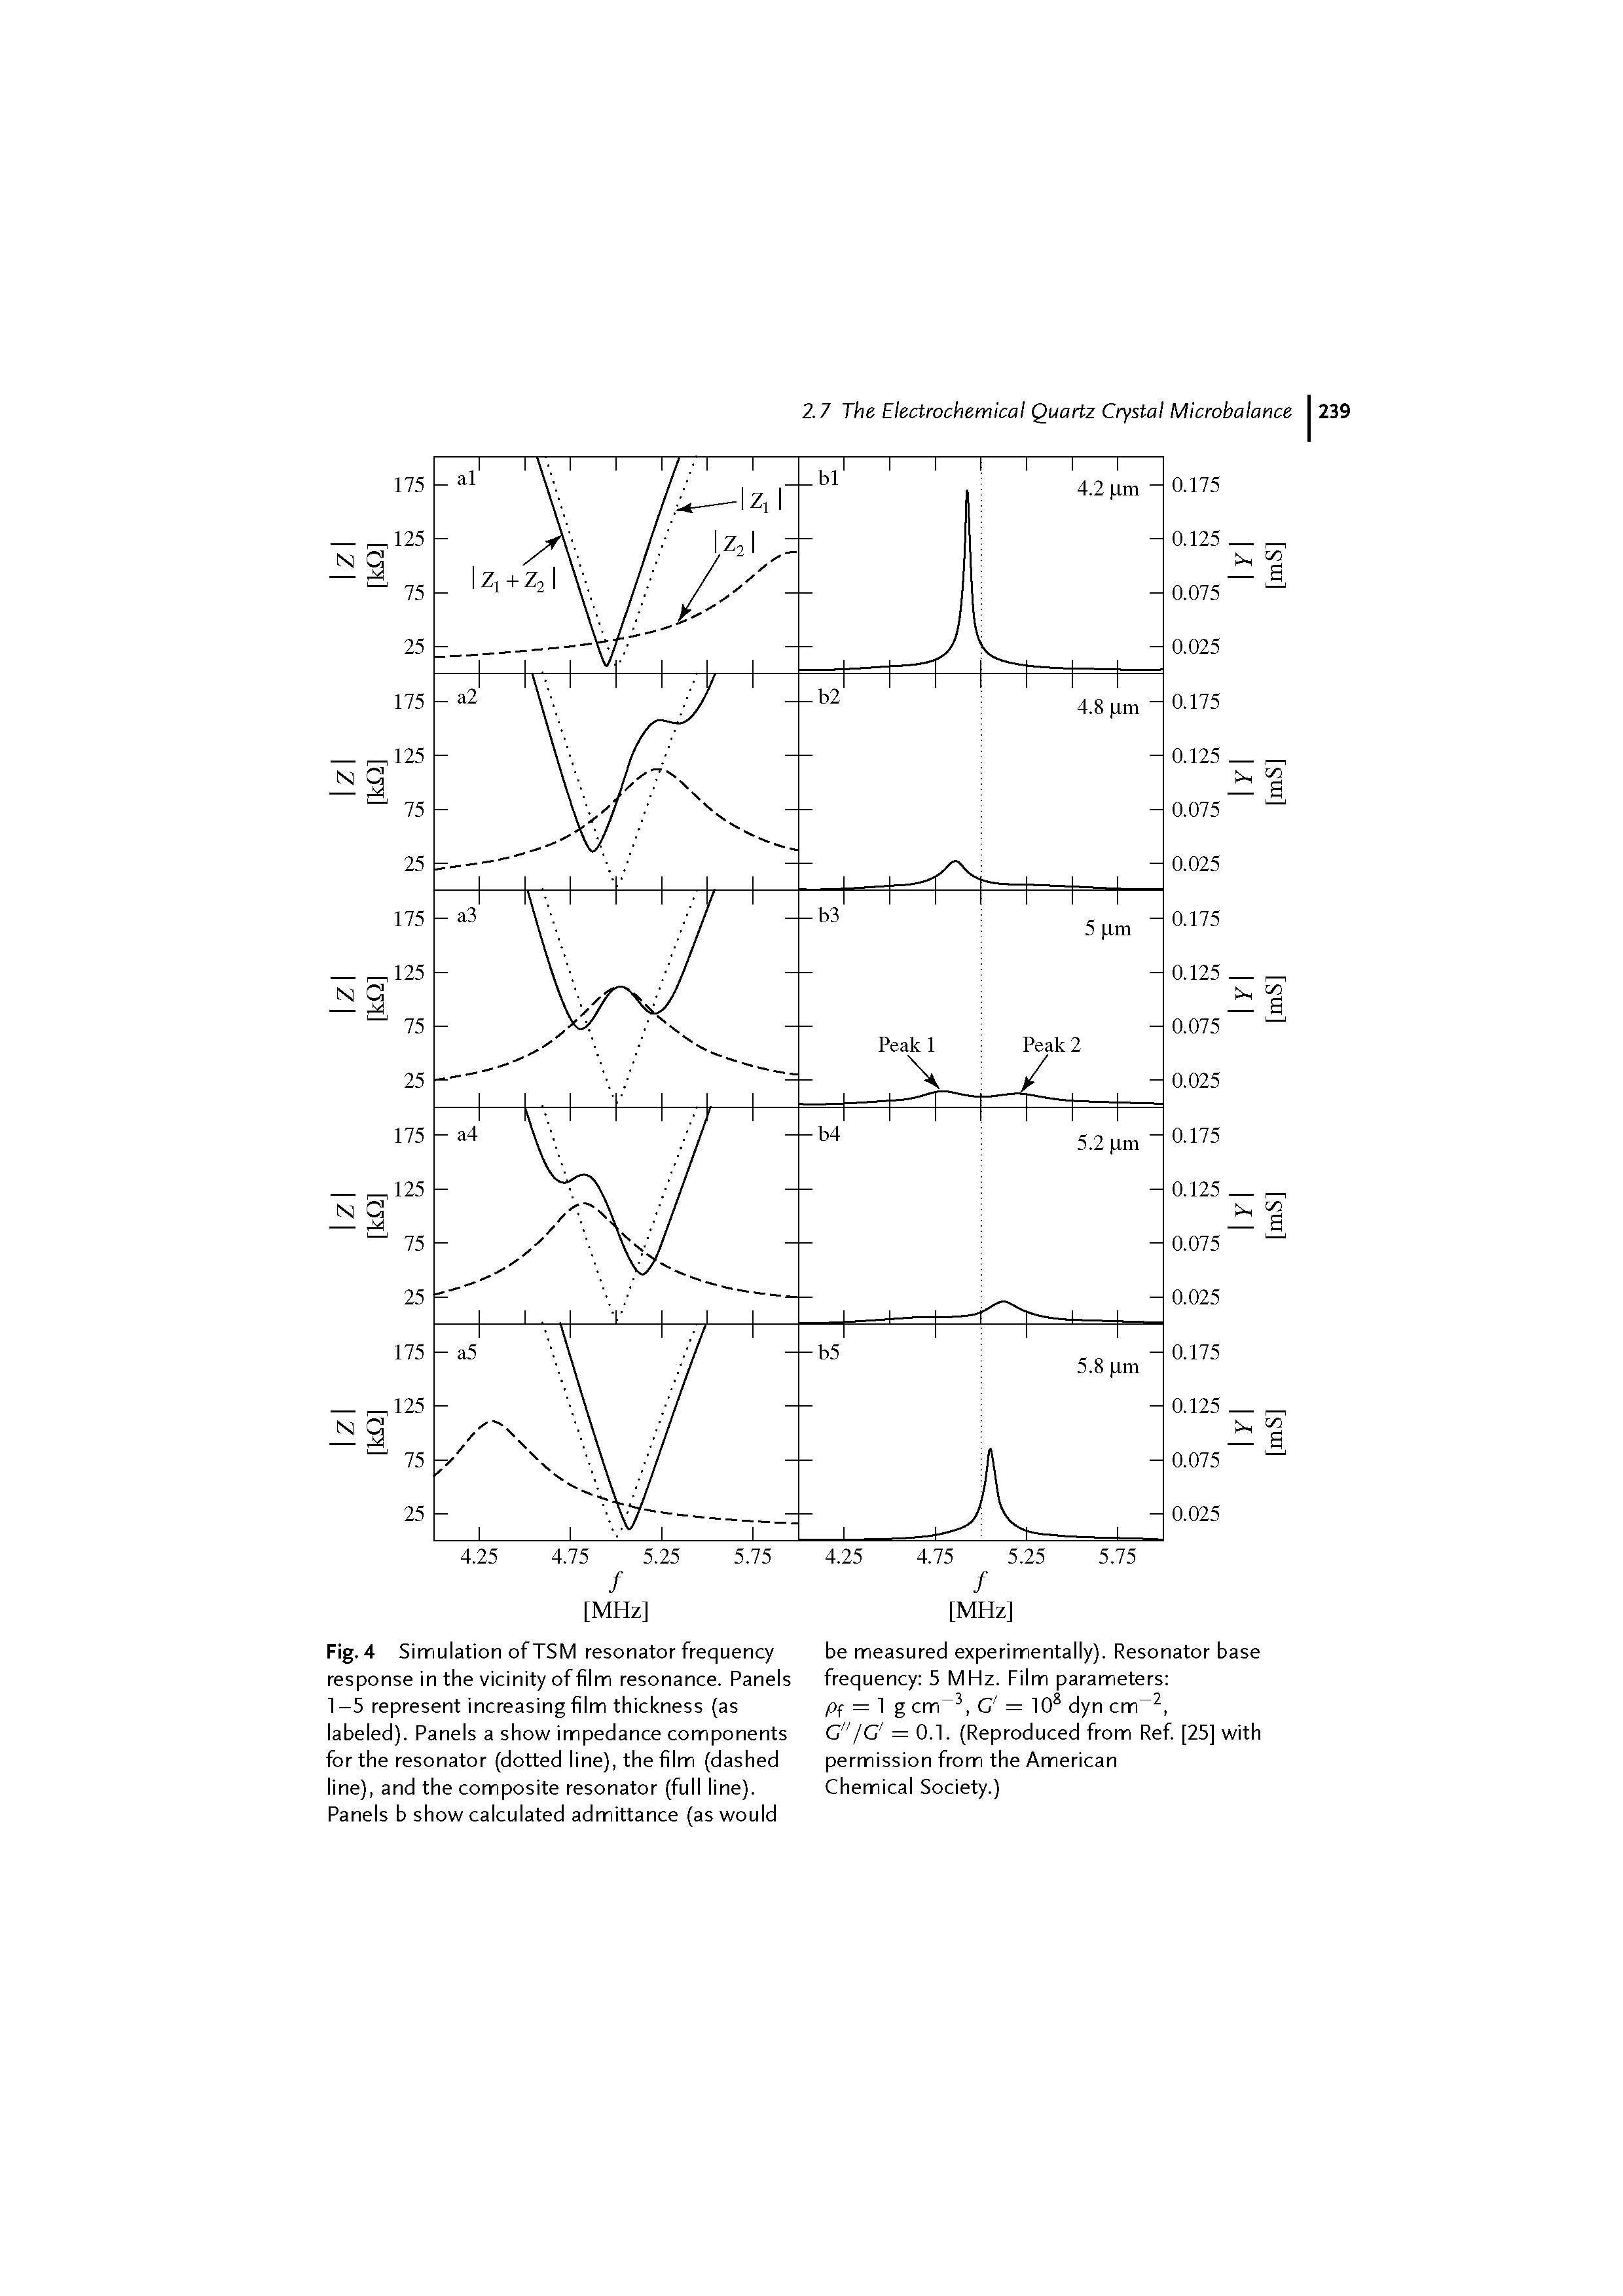 Fig. 4 Simulation of TSM resonator frequency response in the vicinity of film resonance. Panels 1-5 represent increasing film thickness (as labeled). Panels a show impedance components for the resonator (dotted line), the film (dashed line), and the composite resonator (full line). Panels b show calculated admittance (as would...